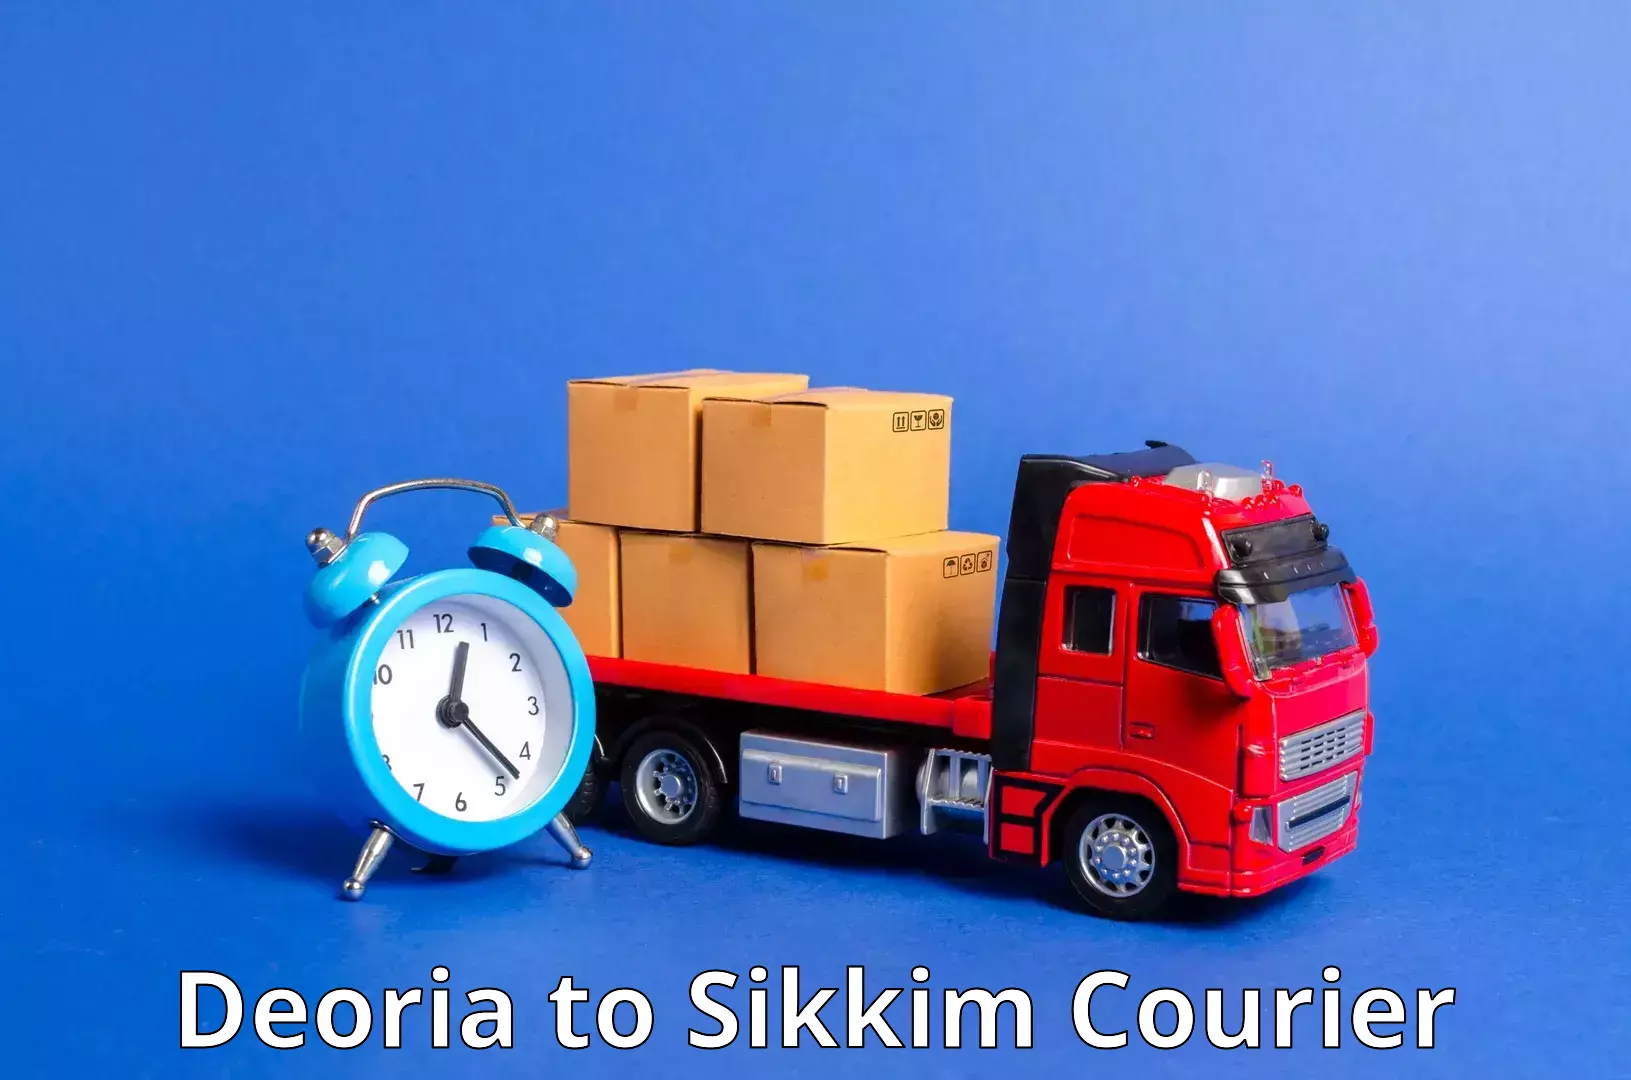 User-friendly delivery service Deoria to Geyzing